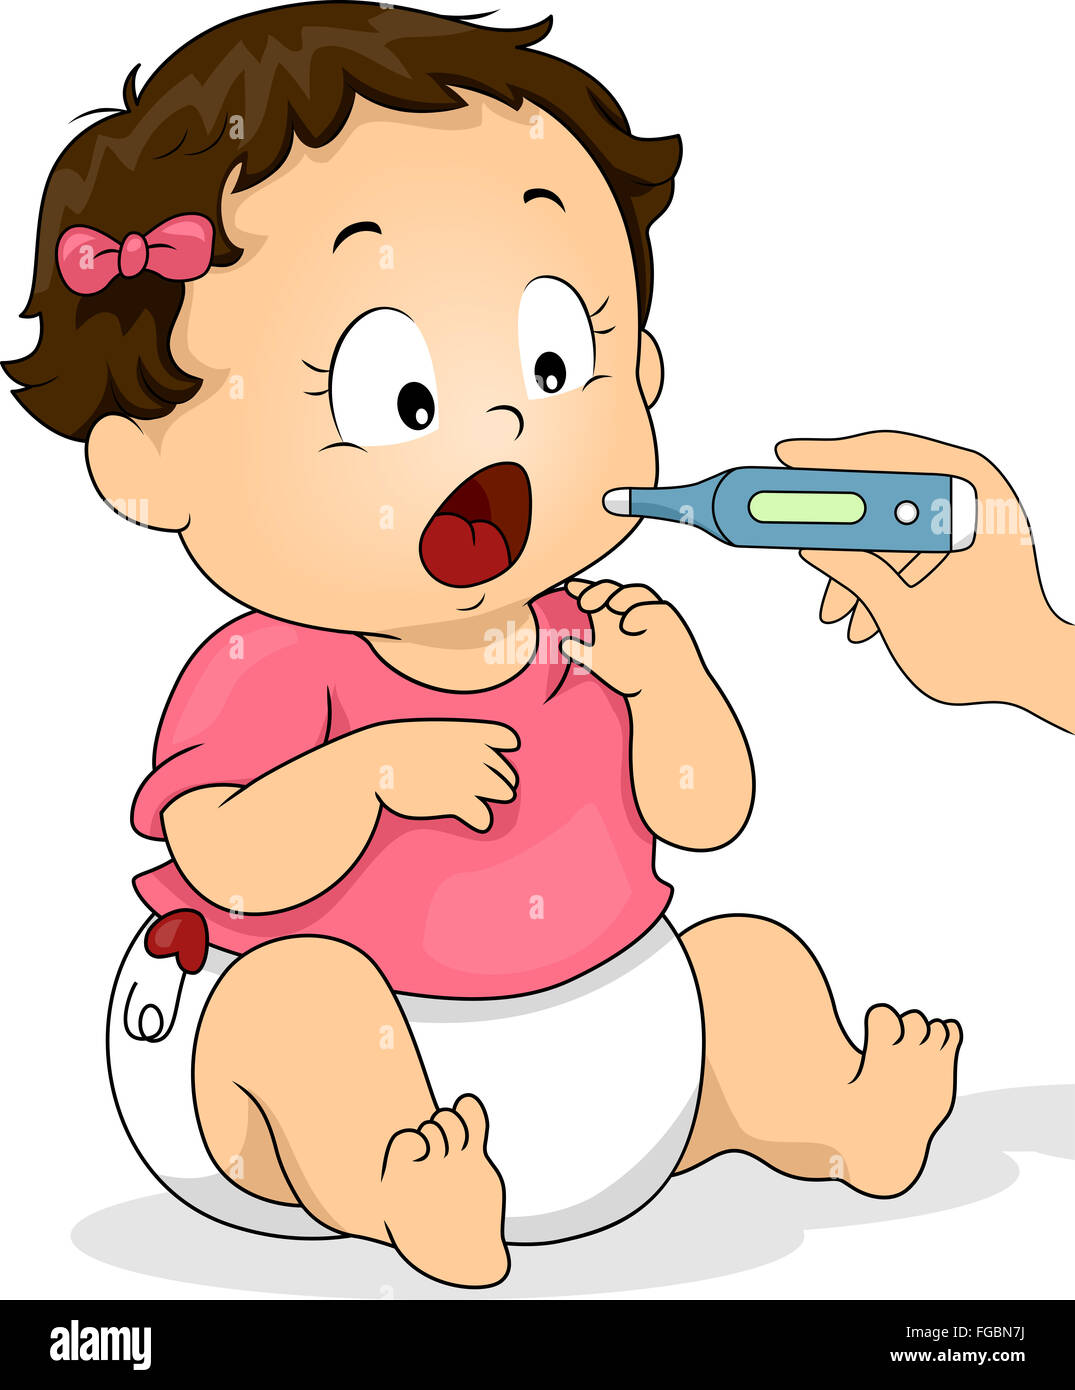 Illustration of a Baby Opening Her Mouth for the Thermometer Stock Photo